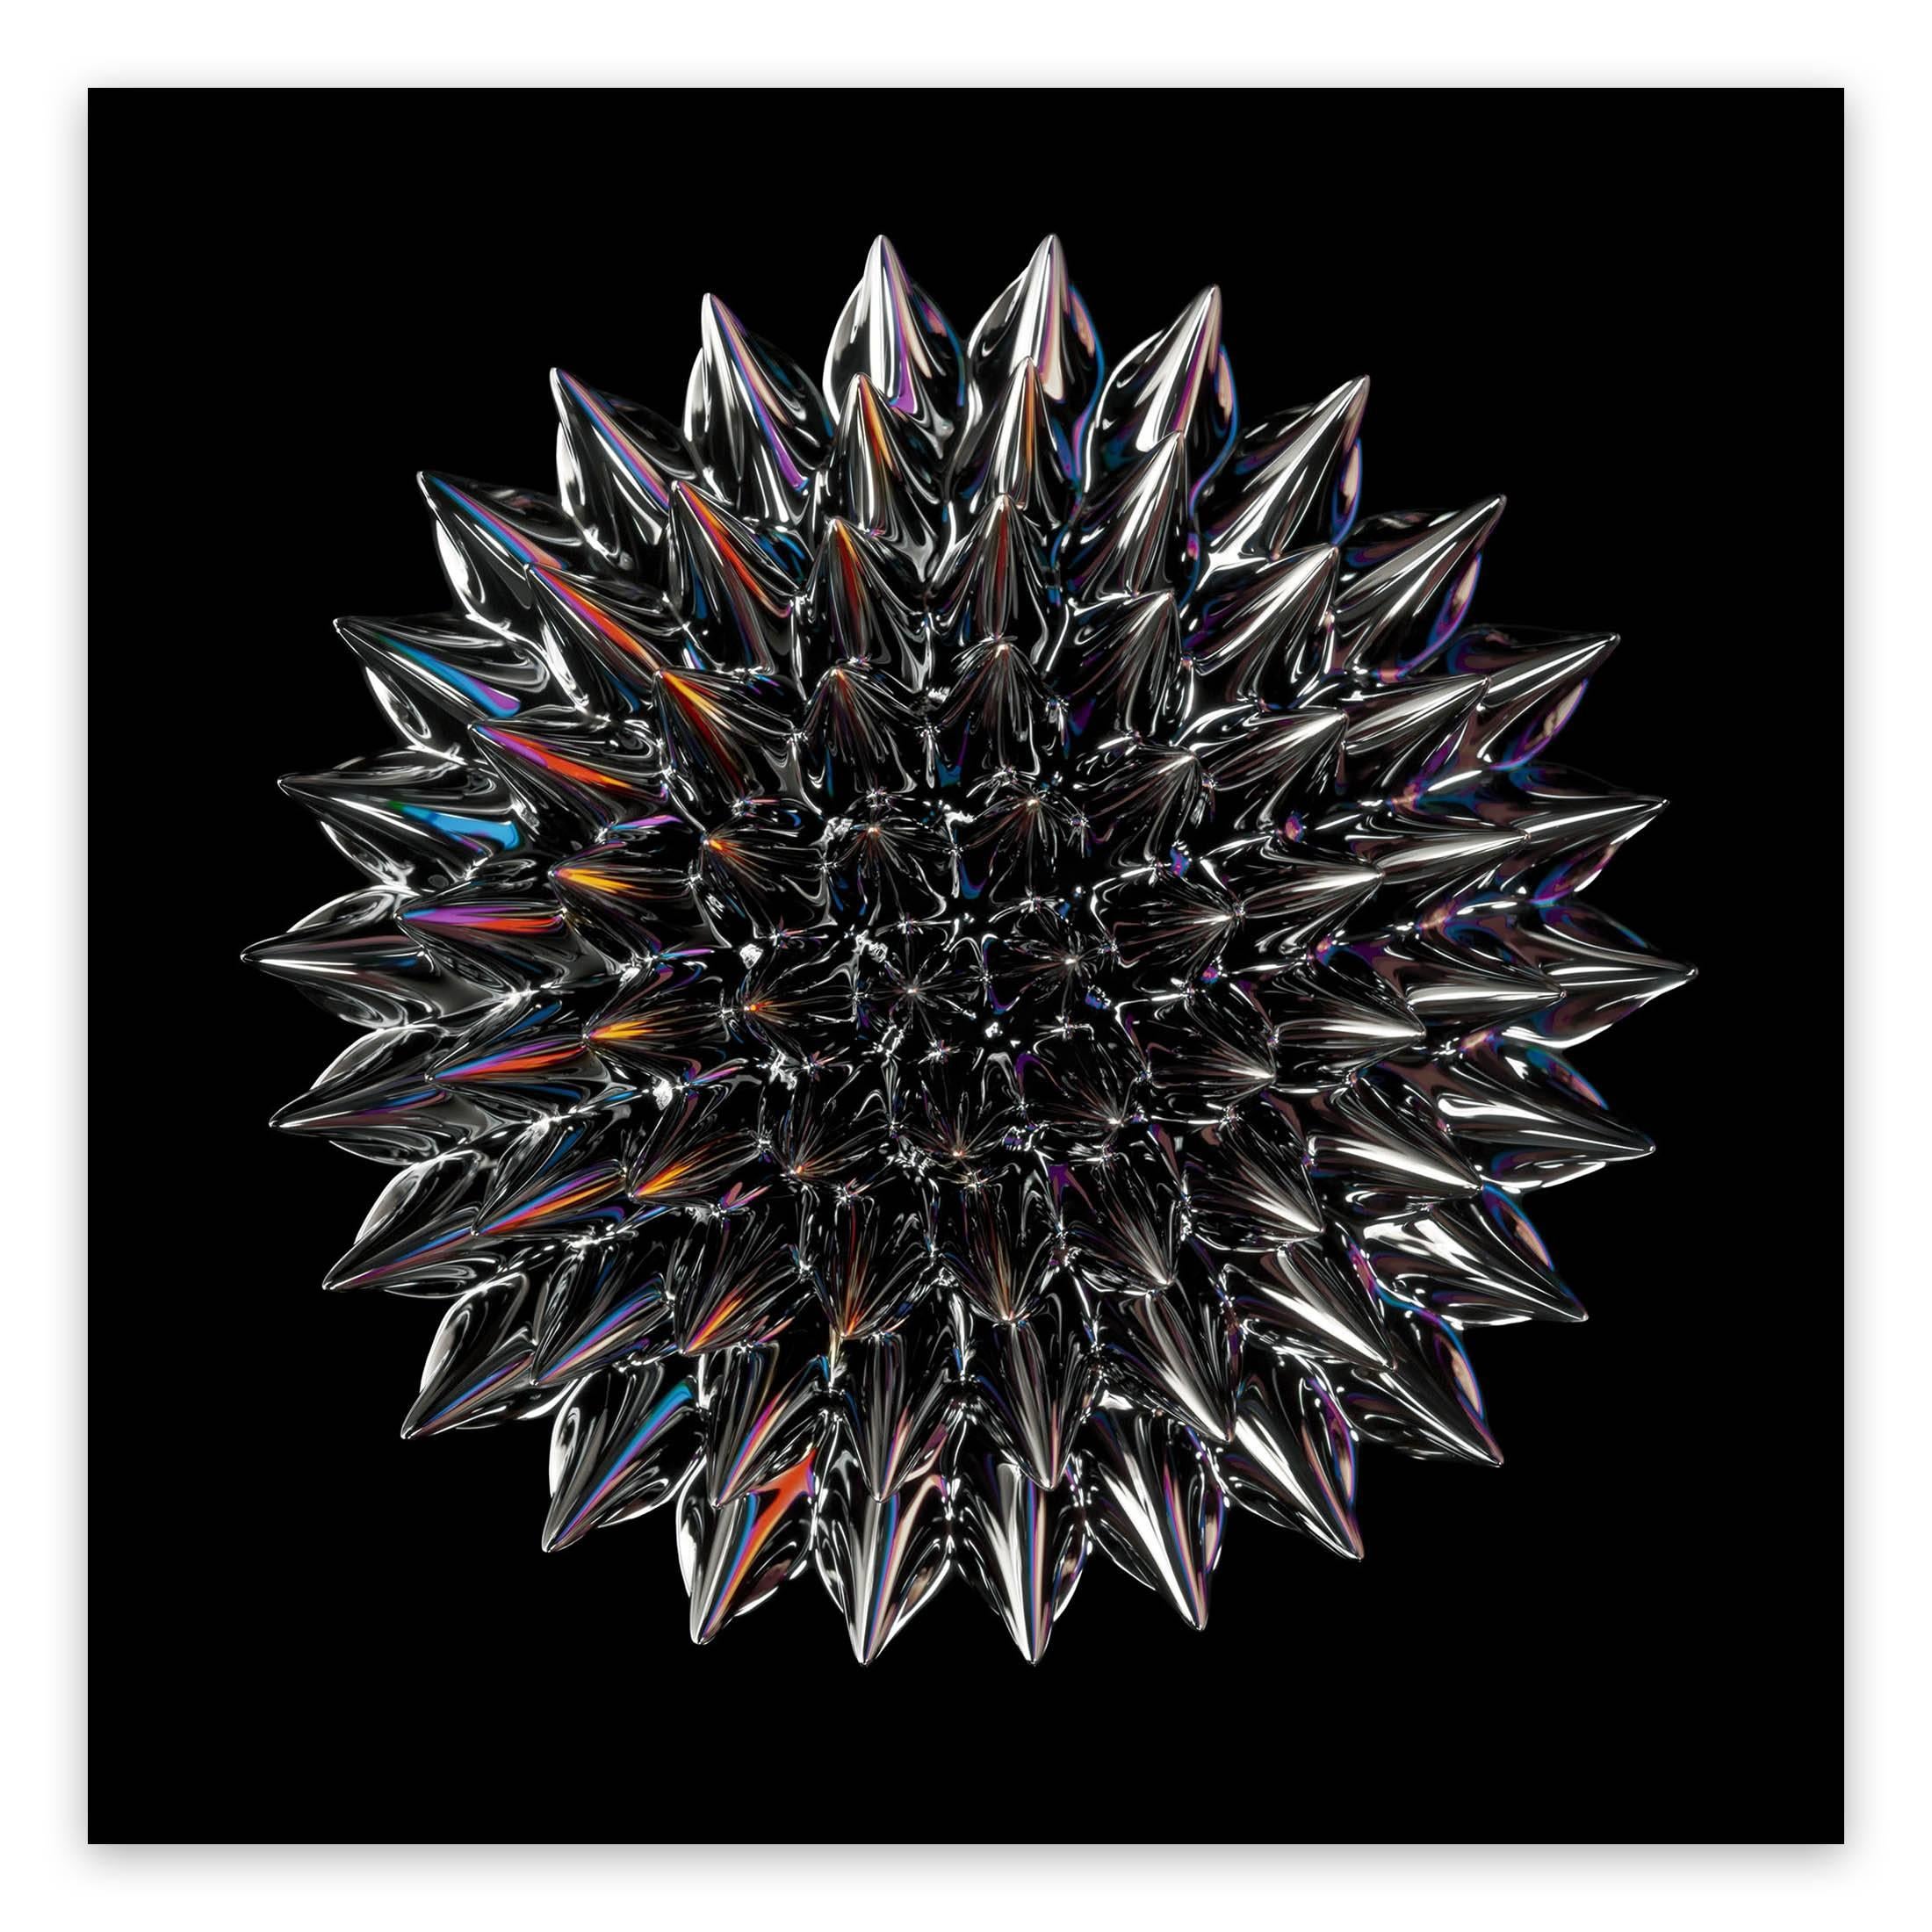 Magnetic radiation 02 (Abstract Photography)

Chromogenic print. Edition 1/5.

In his Magnetic radiation series, Janiak reveals the hidden world of magnetism by photographing ferrofluids. A ferrofluid is a liquid substance magnetized through the